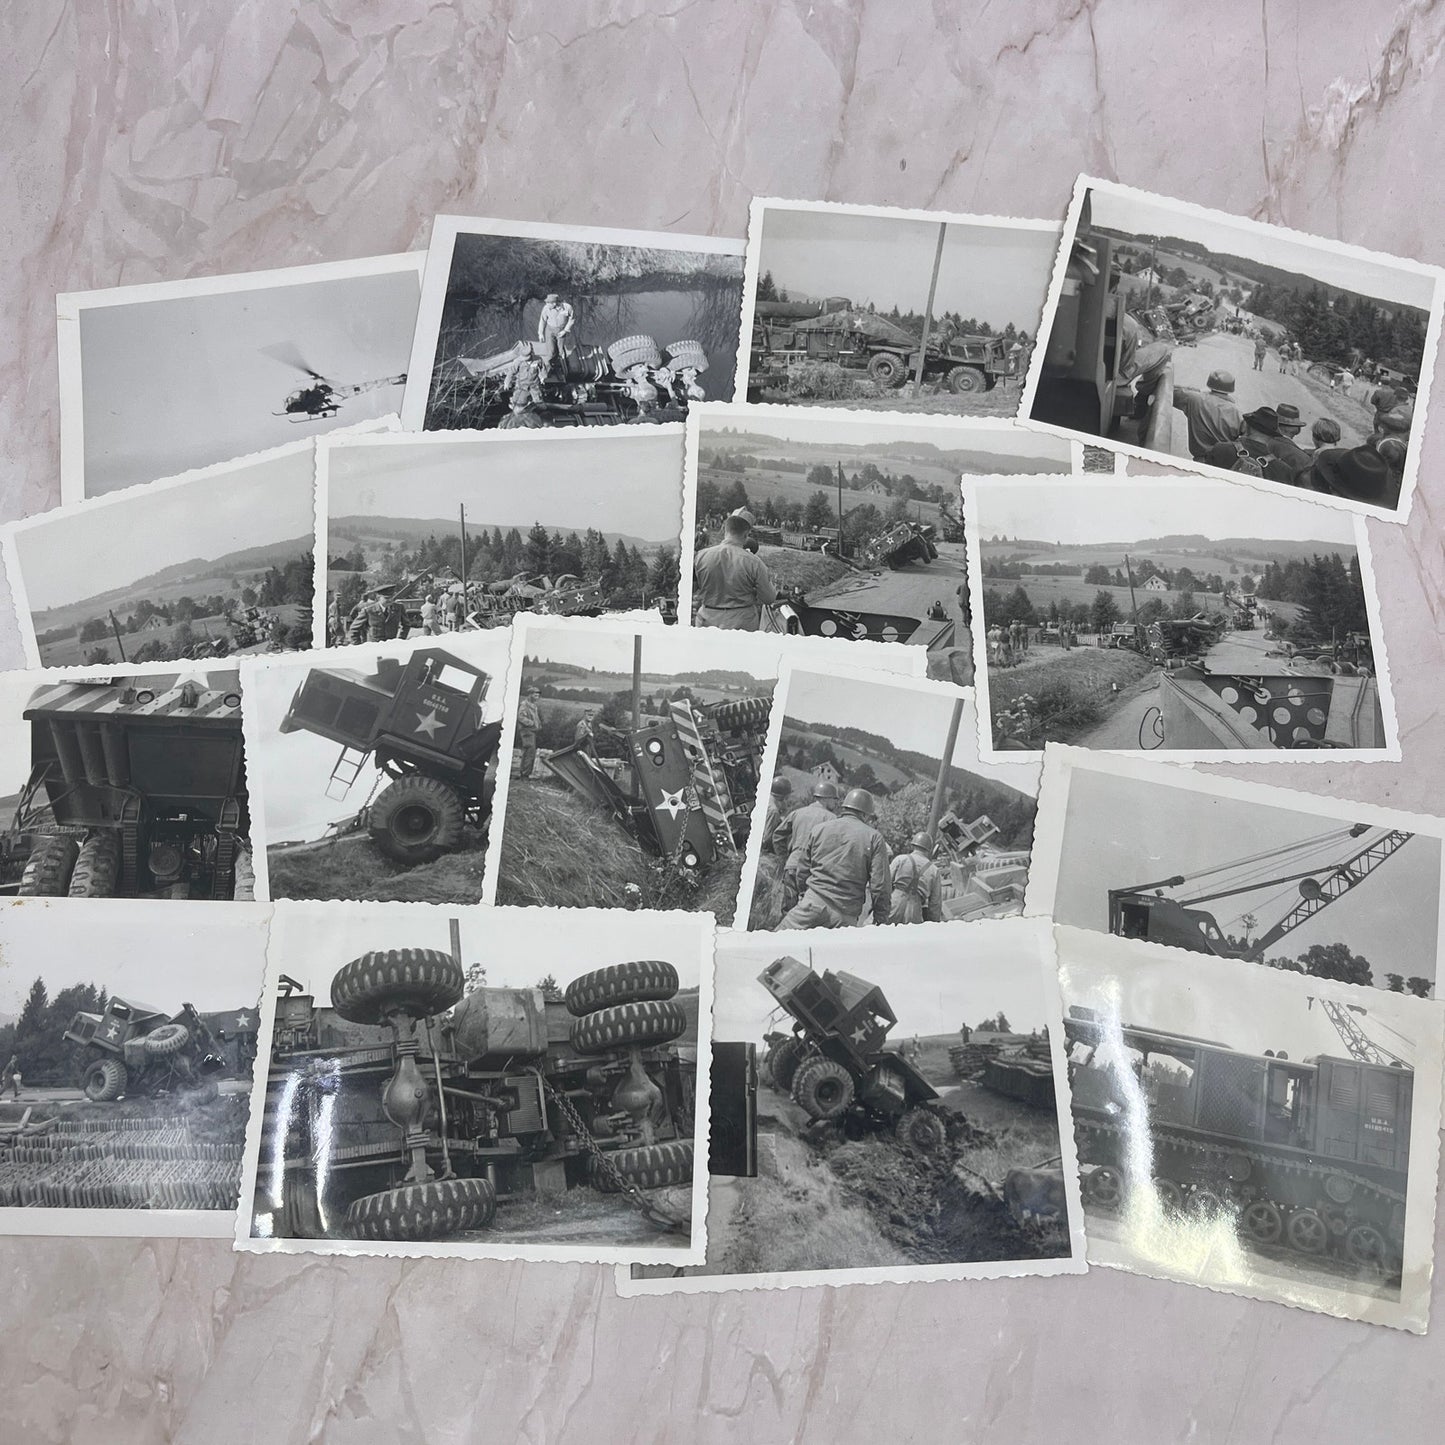 Lot of 17 Photos Overturned Army Vehicle Postwar Germany c1954 Army TG7-AP4